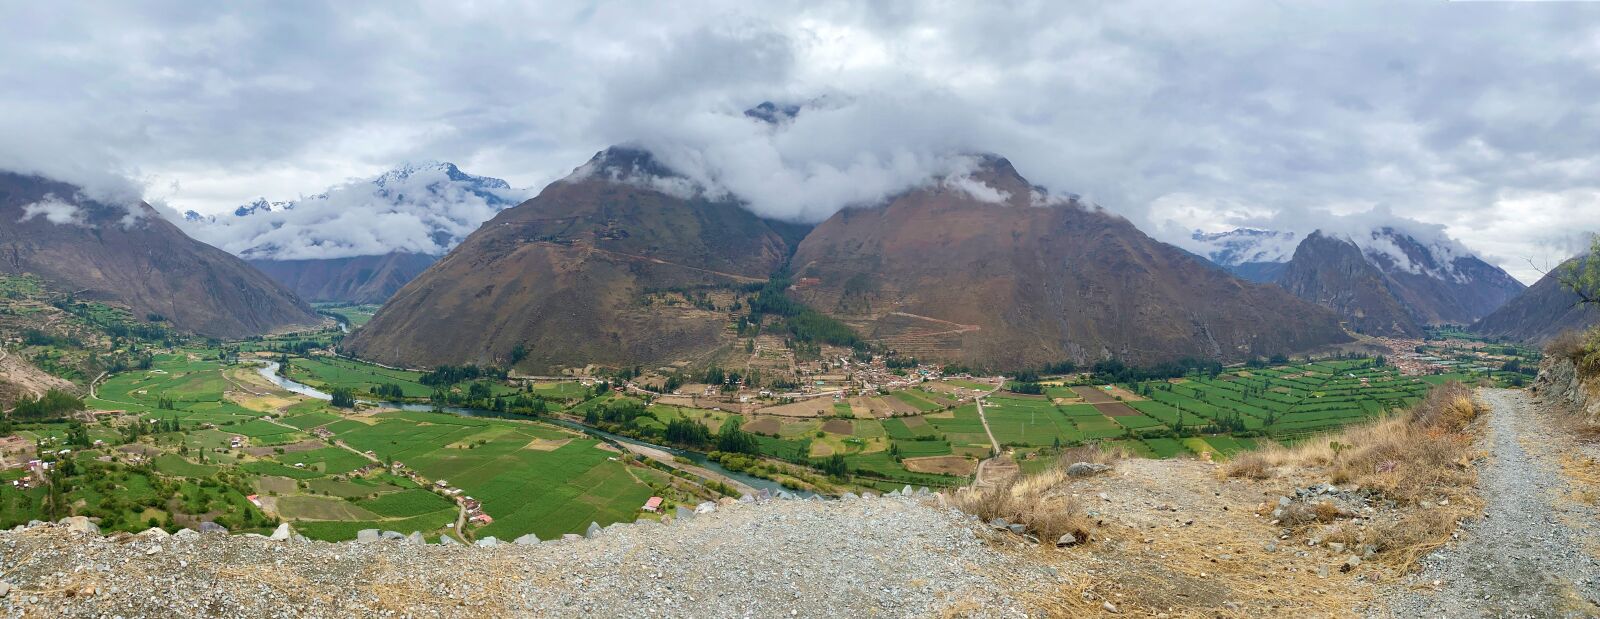 iPhone 11 Pro Max back camera 4.25mm f/1.8 sample photo. Panorama, mountains, andes photography